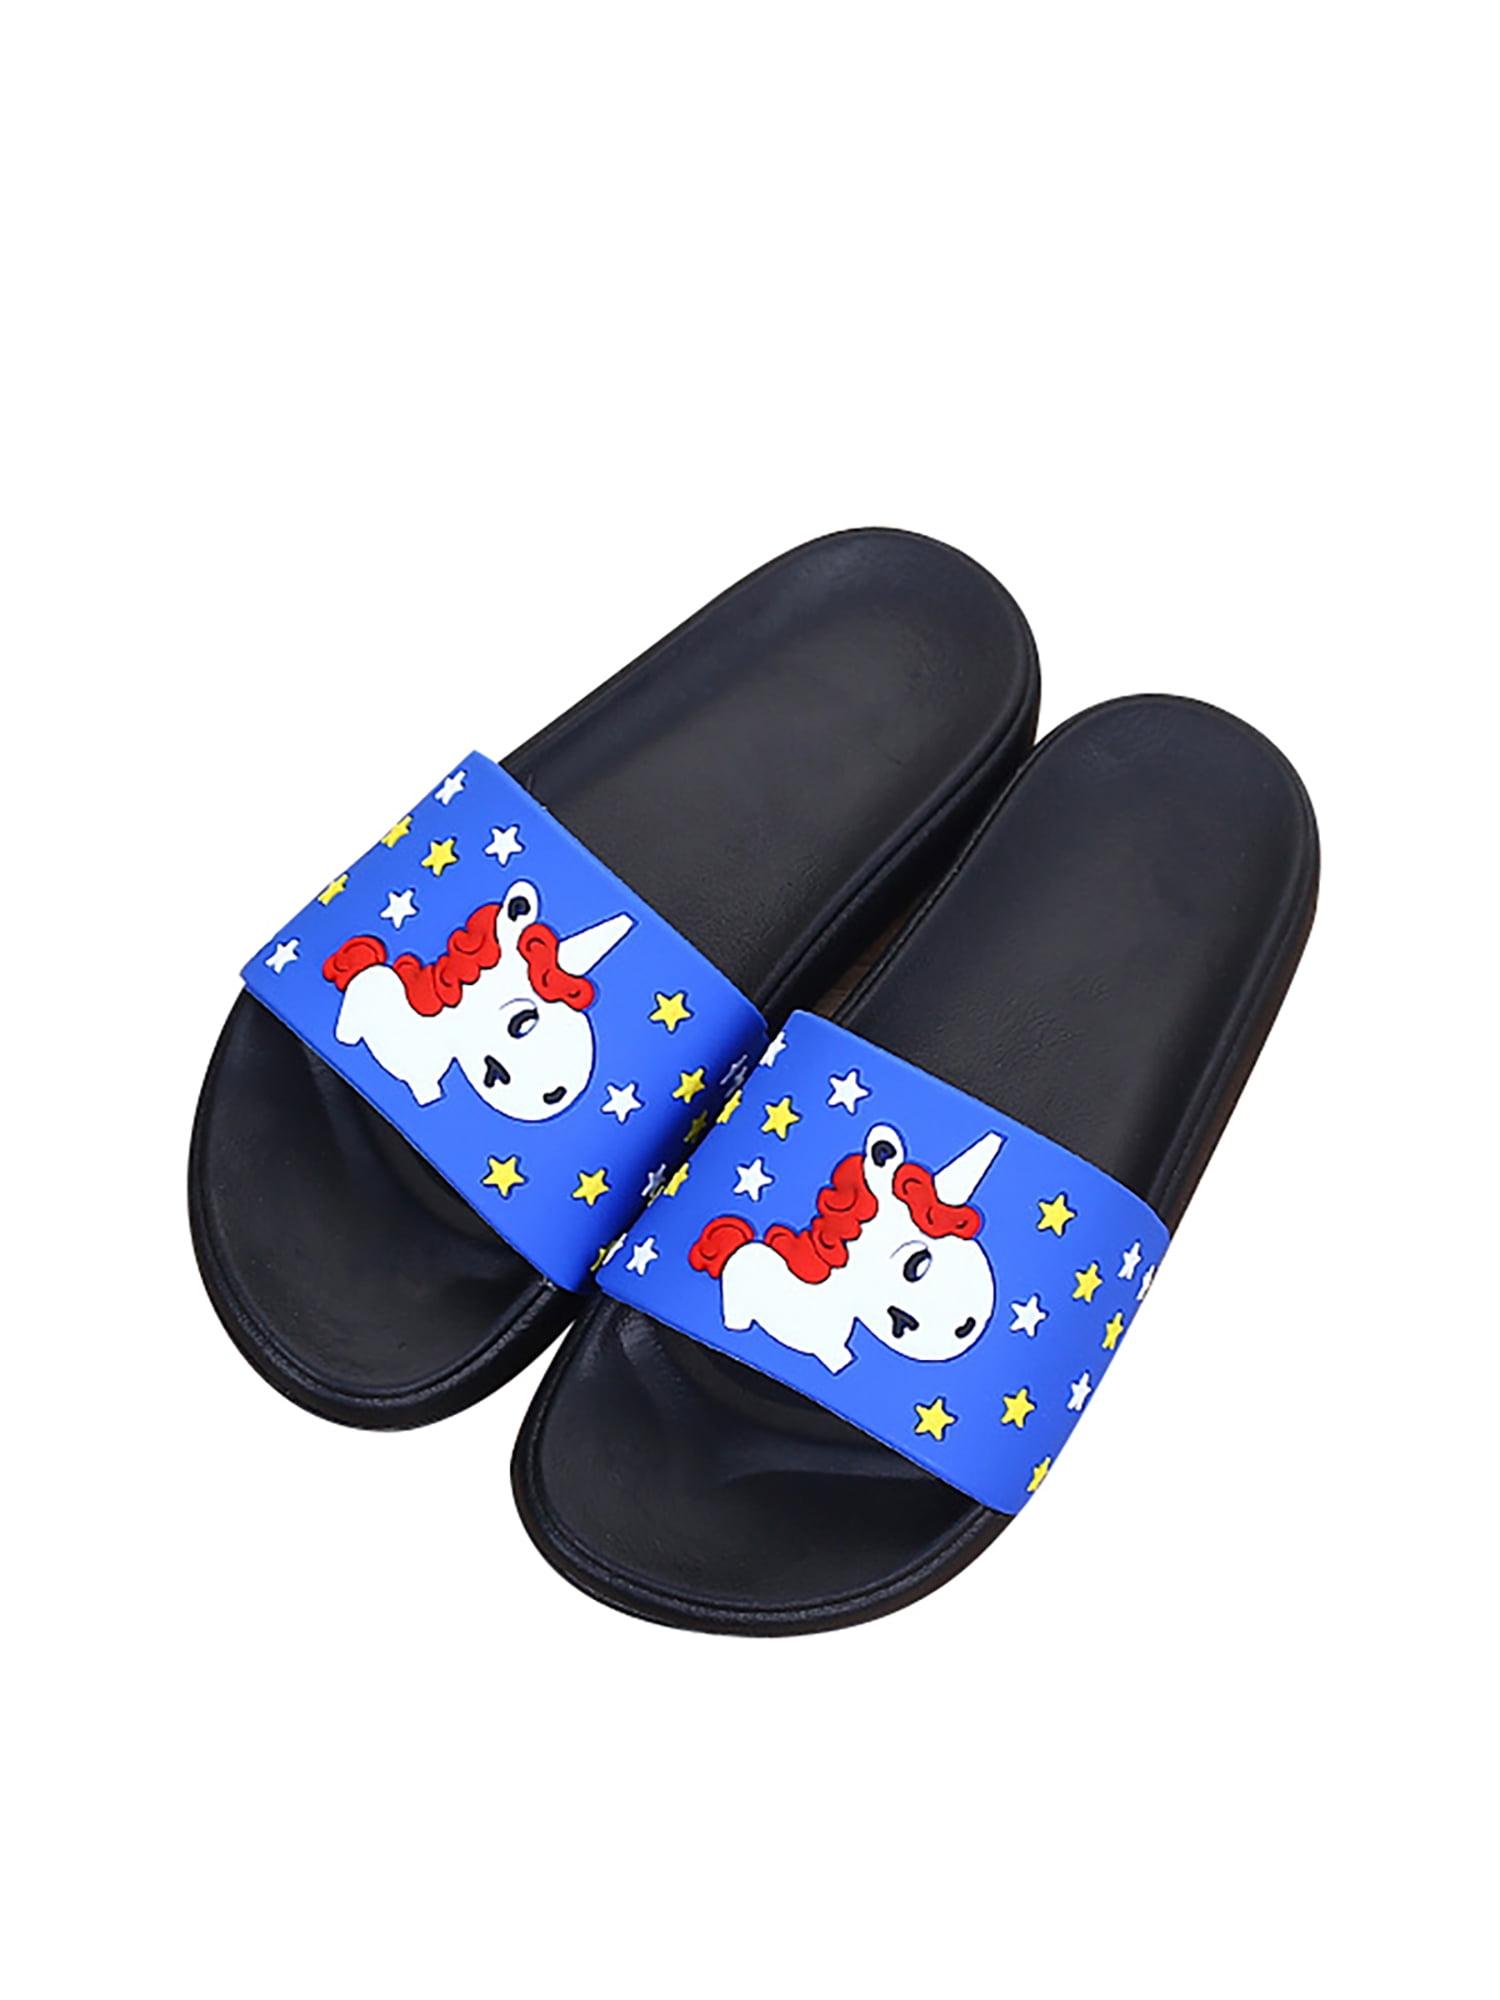 Women Slides Shoes Large Cartoon Sloth Slippers Classic Sandals 